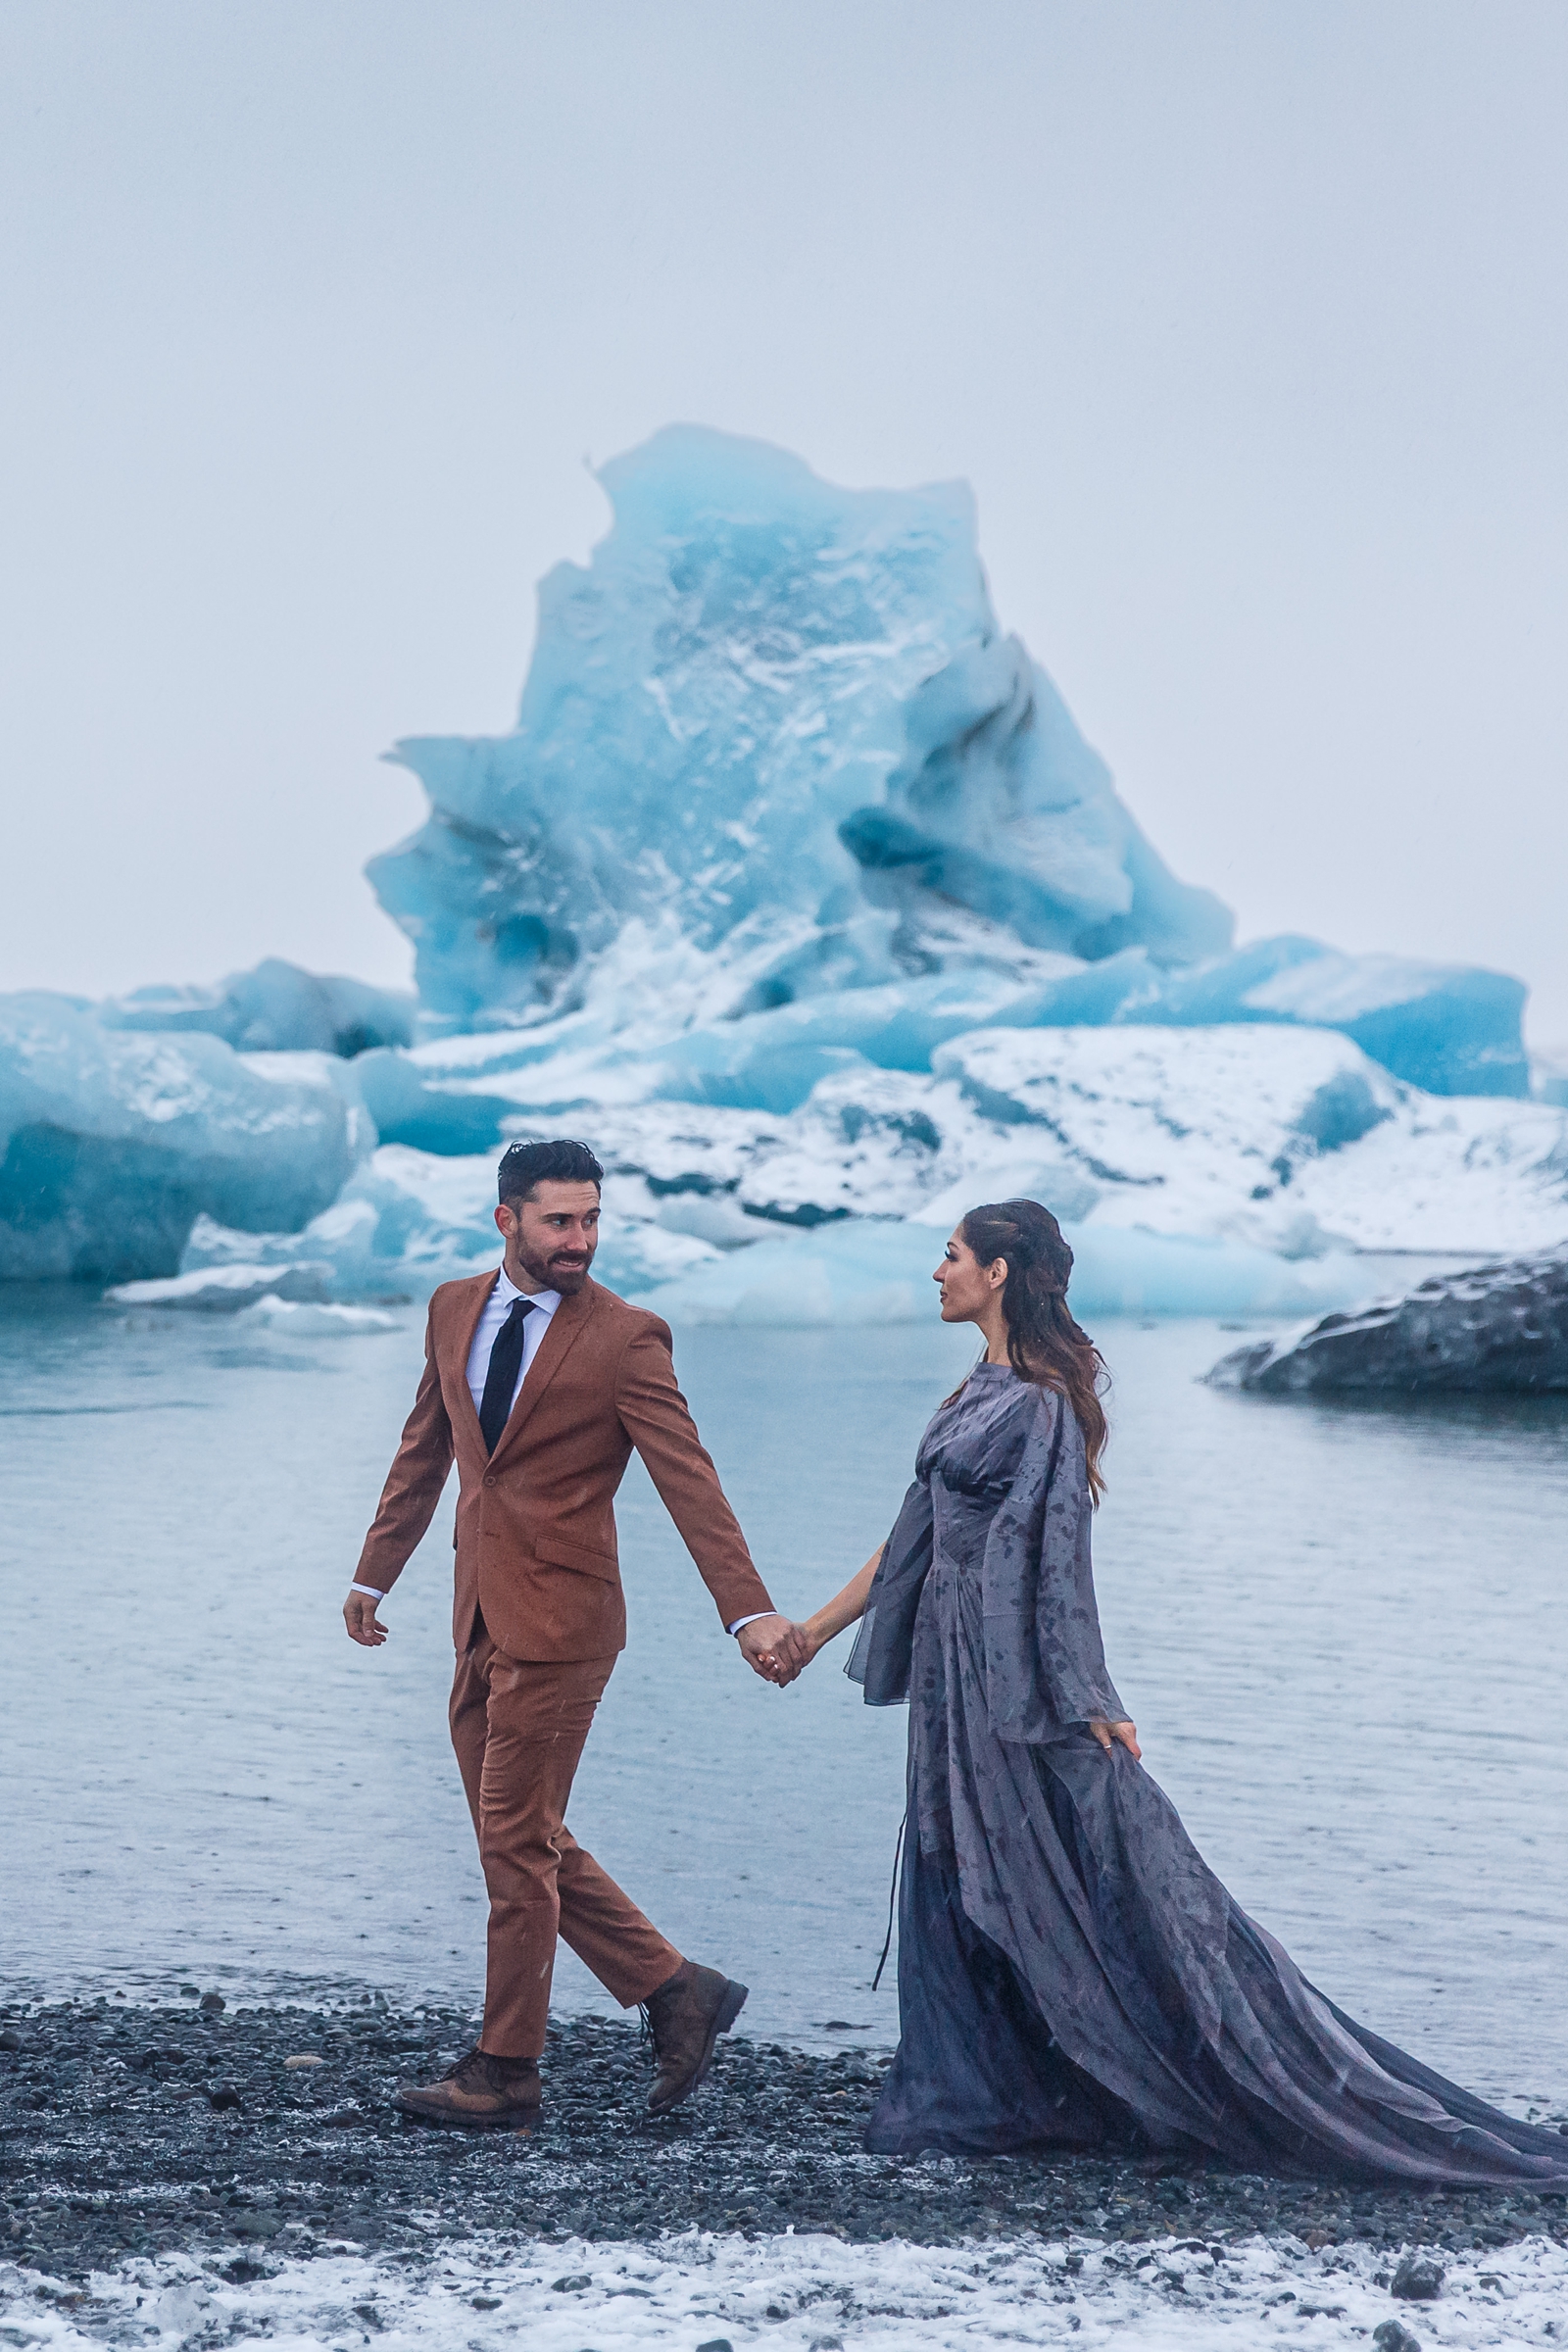 This couple had a fairytale Narnia wedding in Southern Iceland's winter.